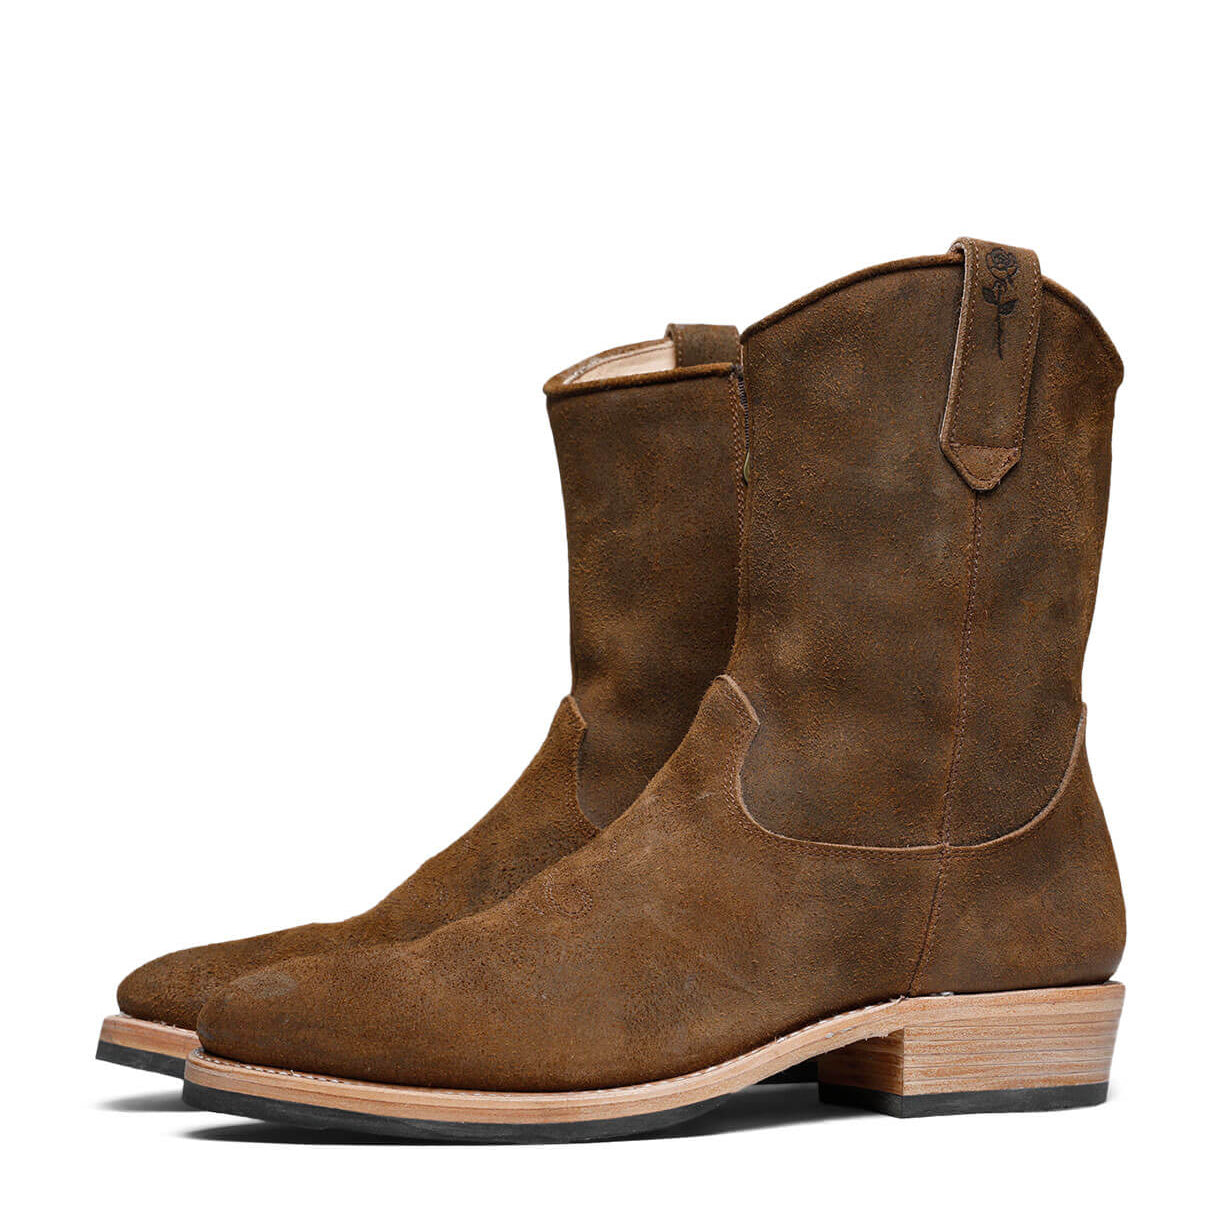 A pair of Isaac Cowboy boots by Santa Rosa Brand on a white background, featuring American Bison Viking suede leather upper and natural vegetable tanned leather lining.